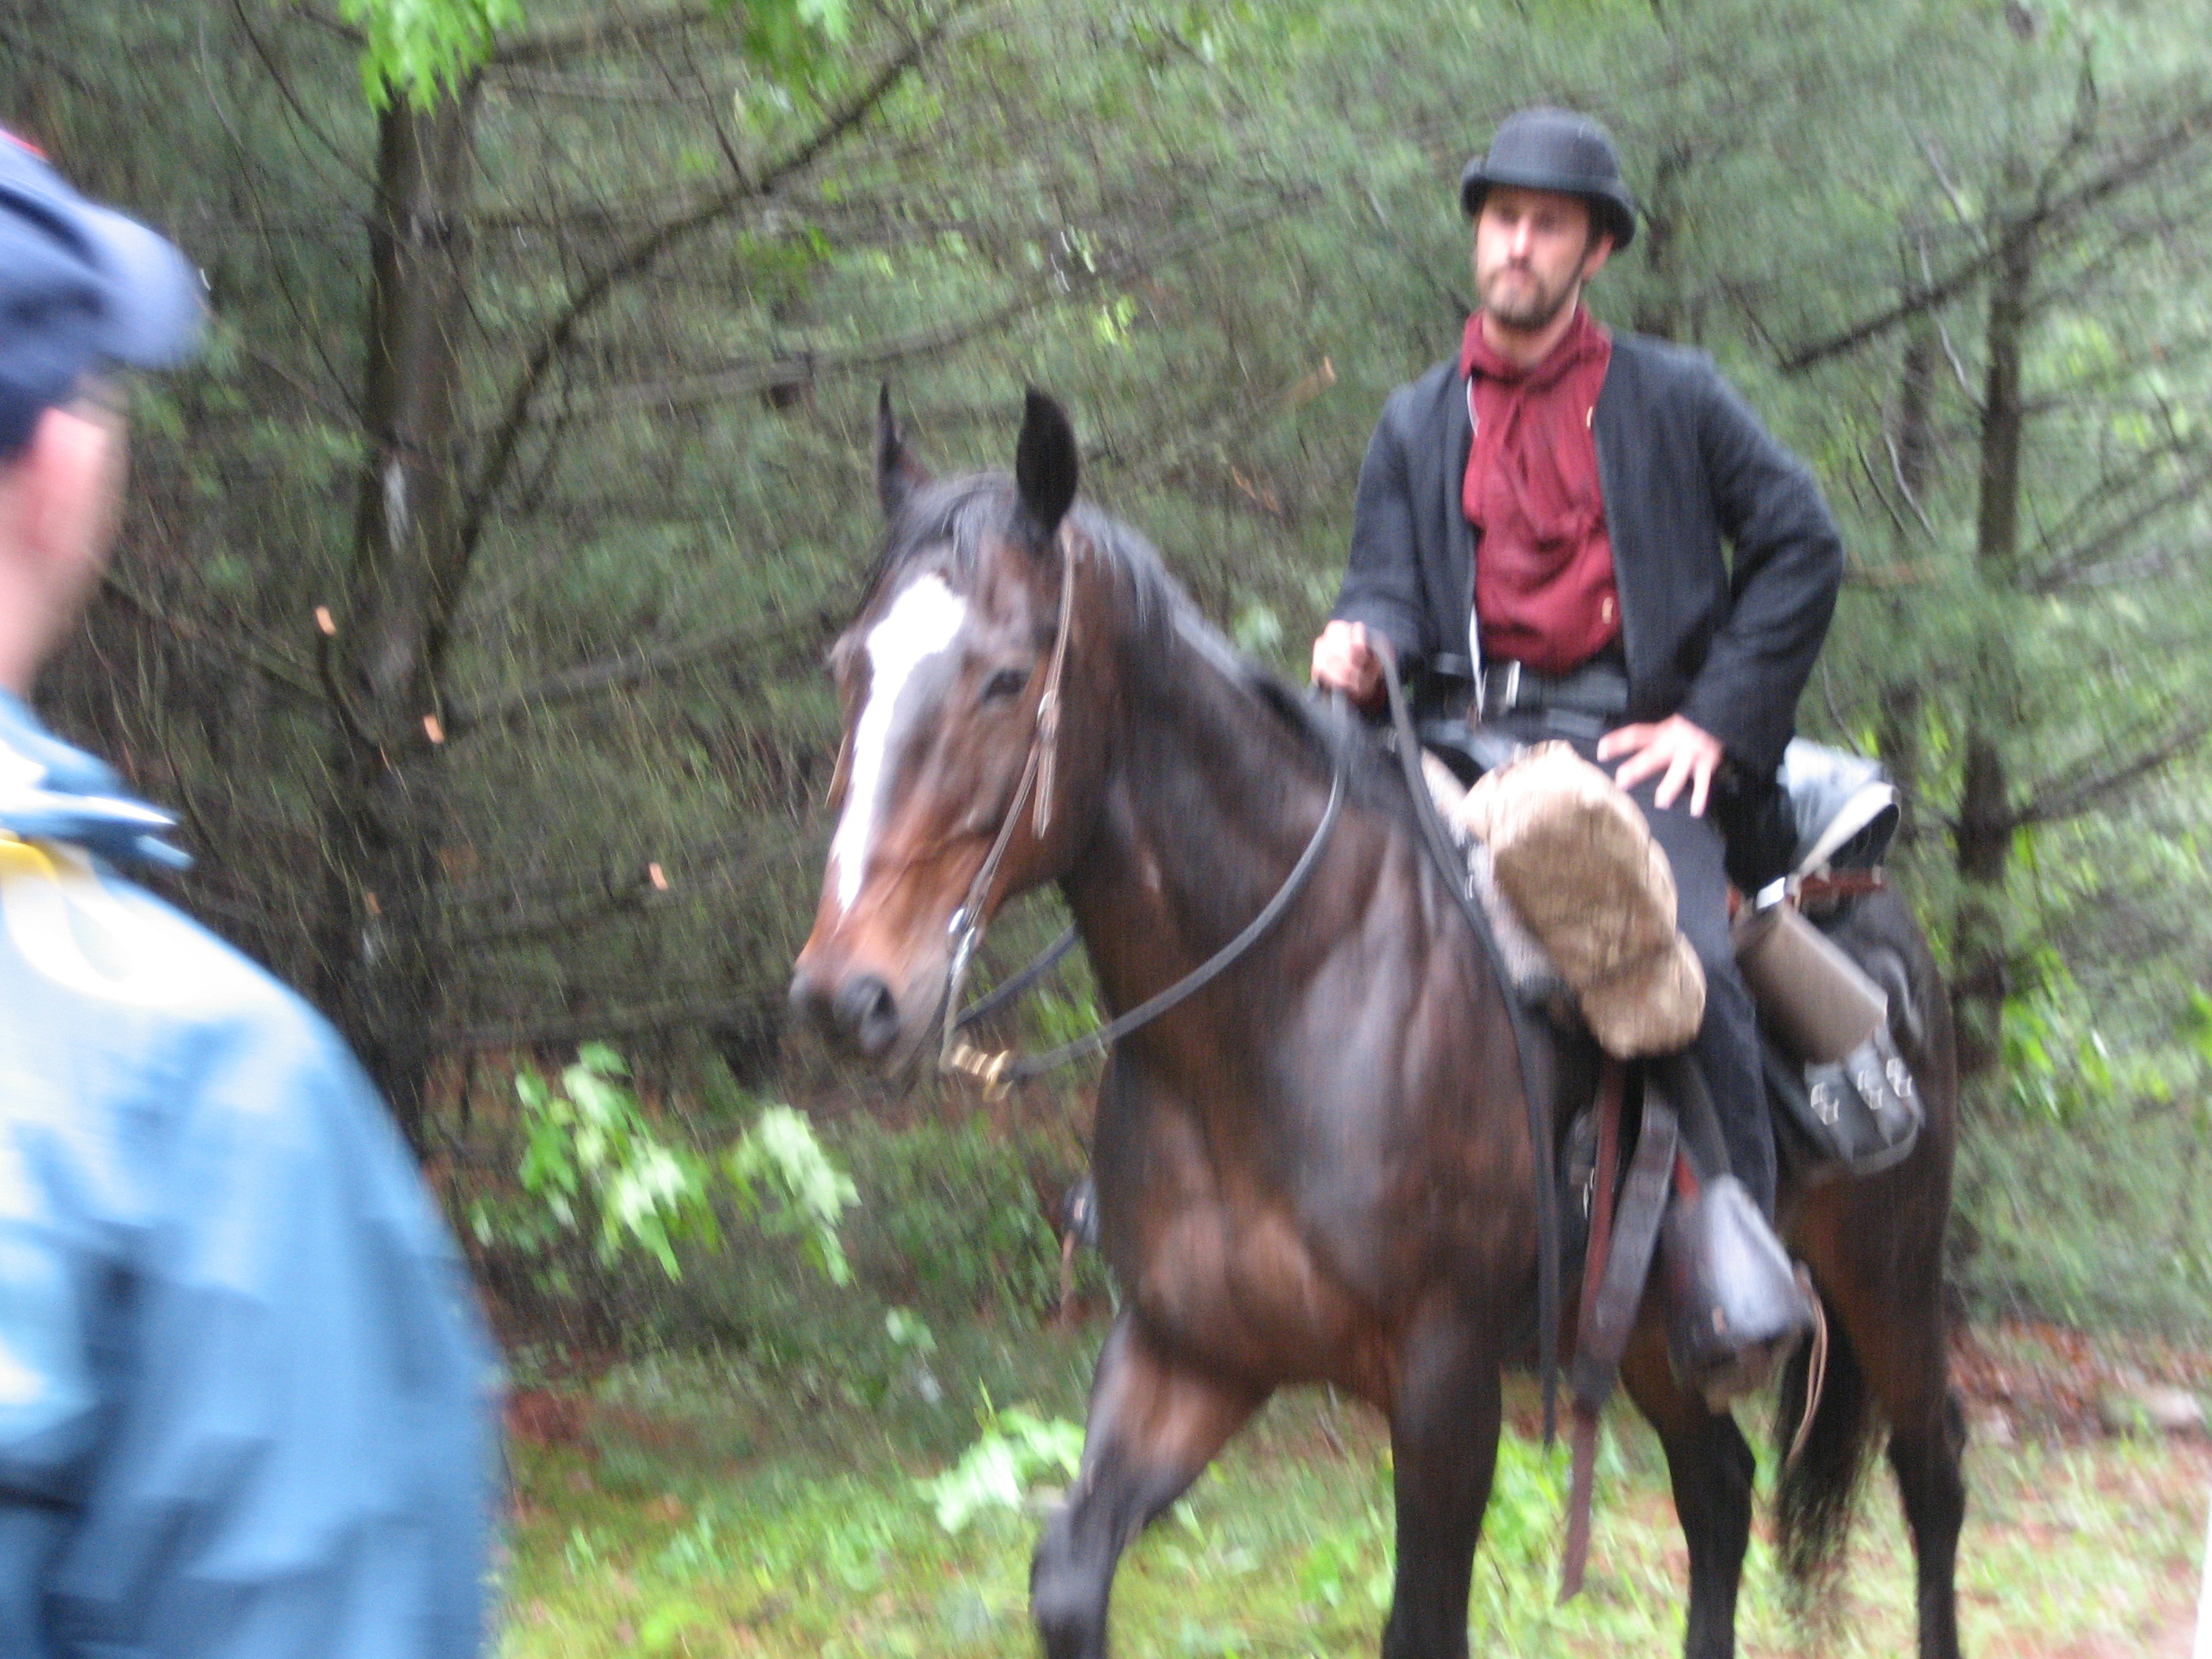 Brian Danner as DP Upham in Aftershock. (riding Blaze)